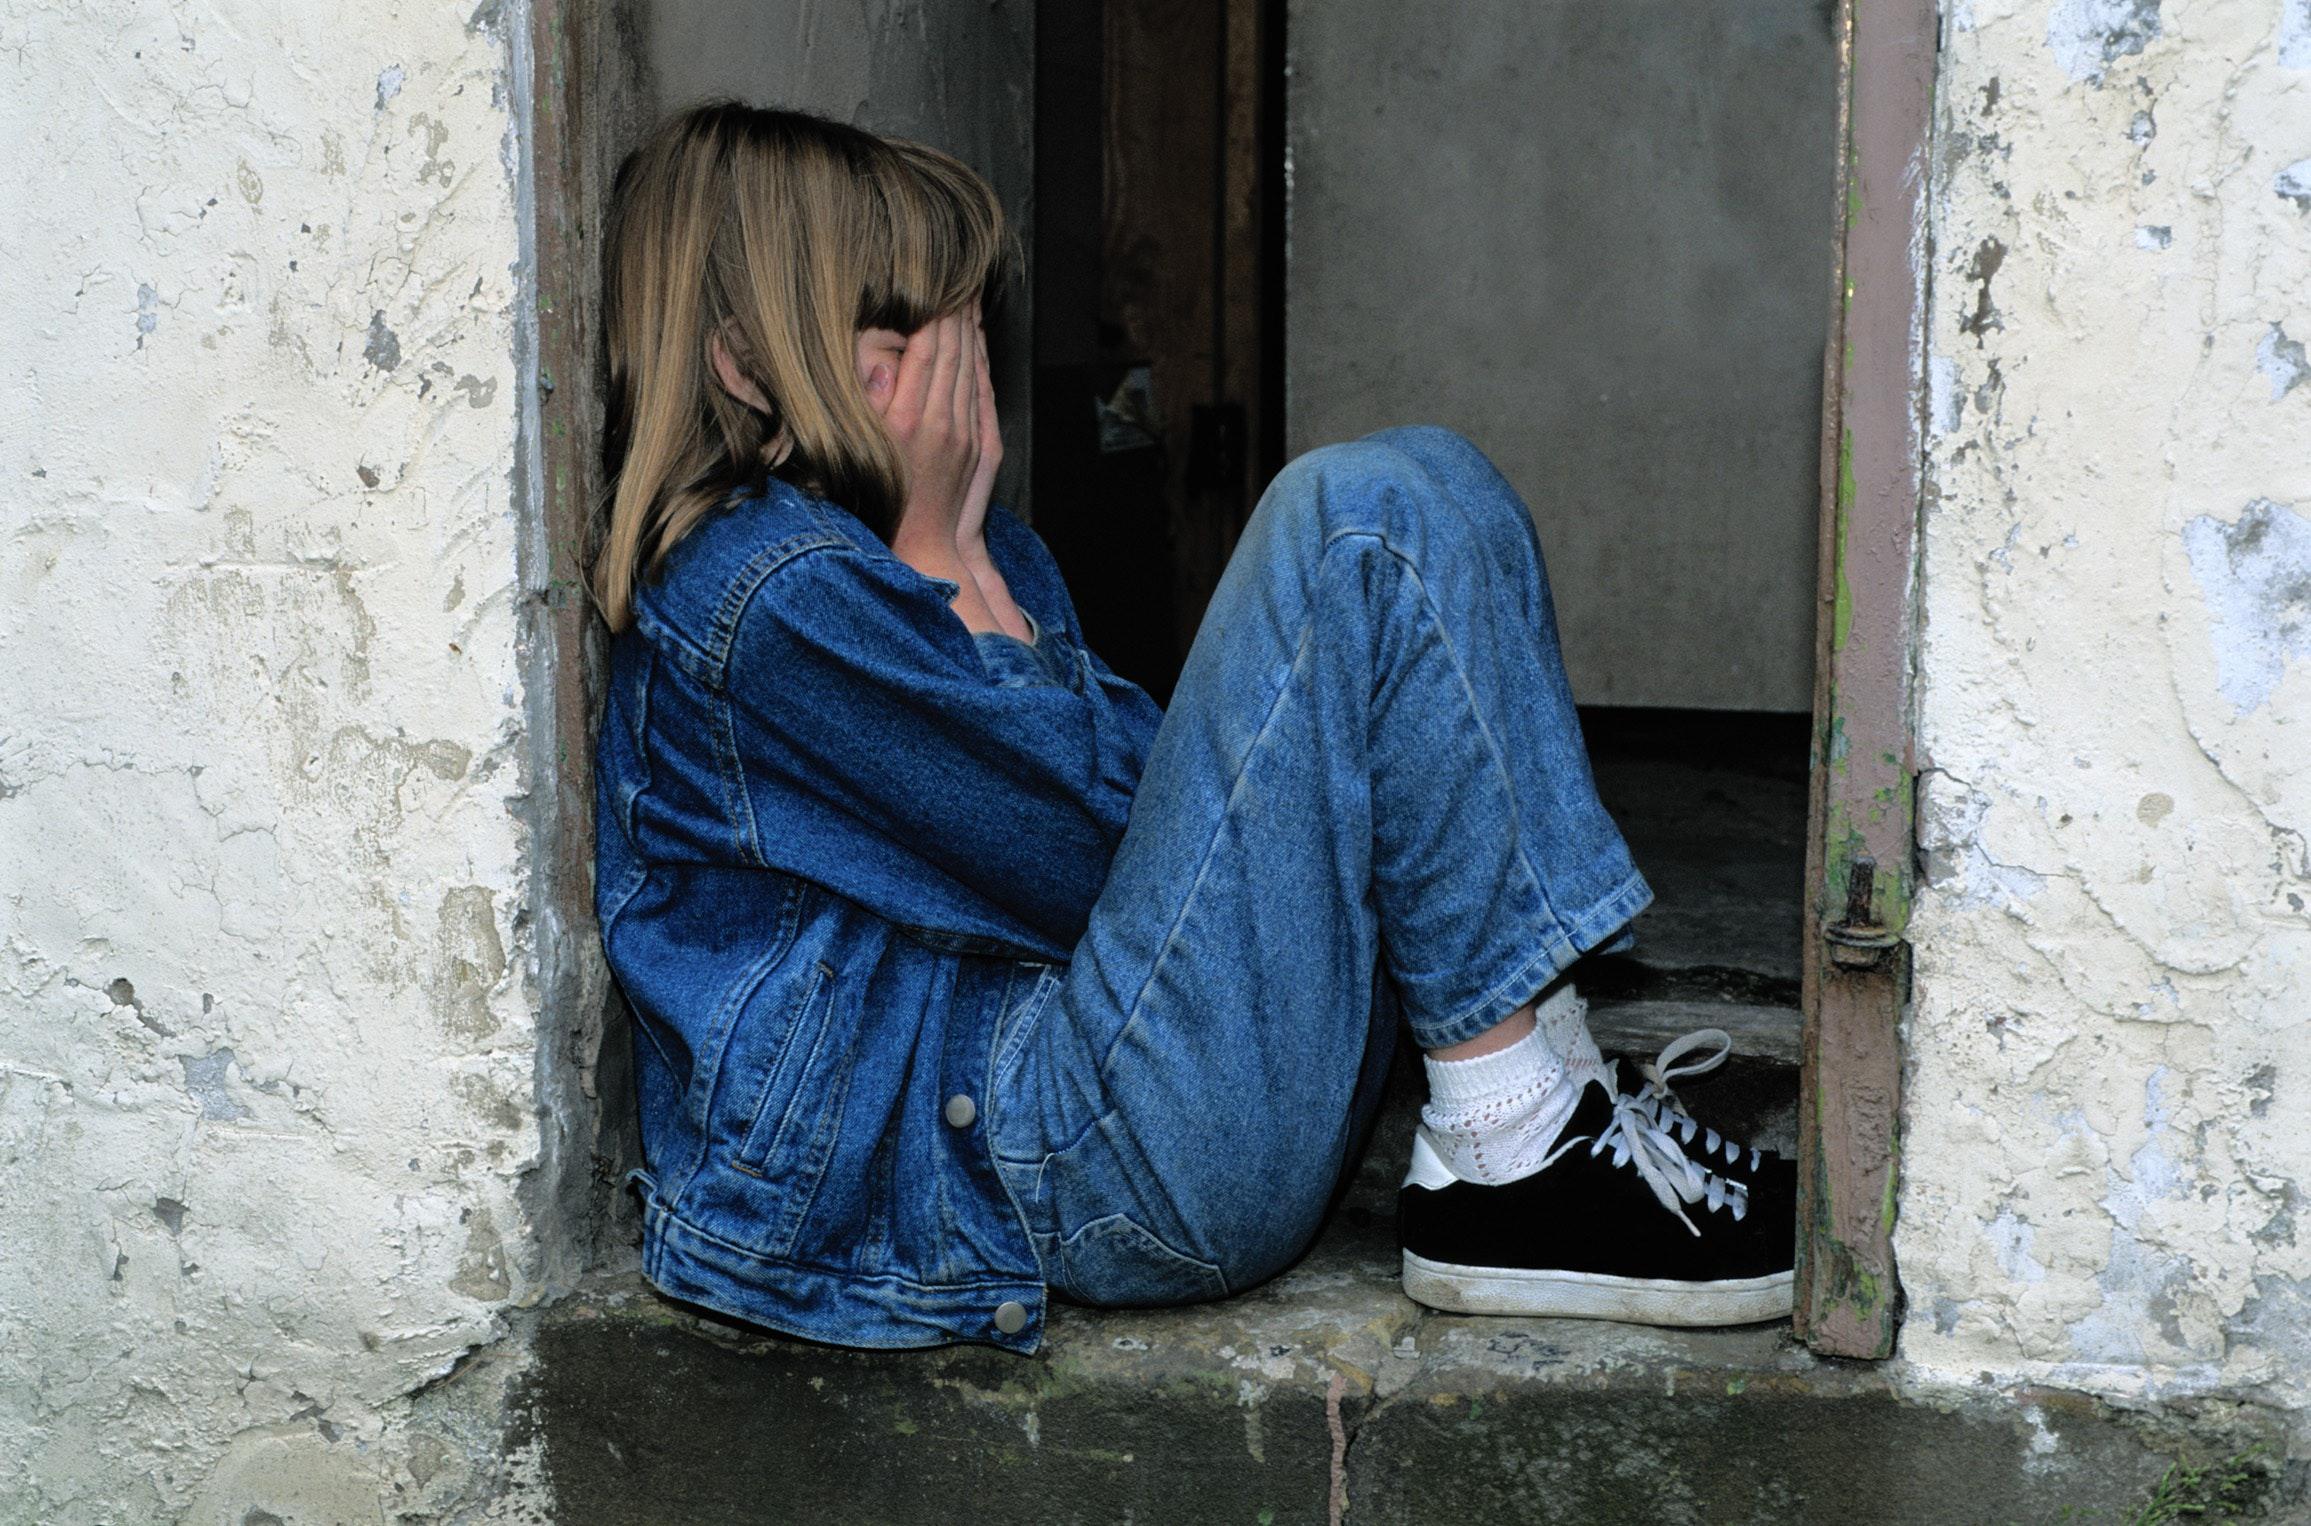 young girl sits in doorway crying into her hands